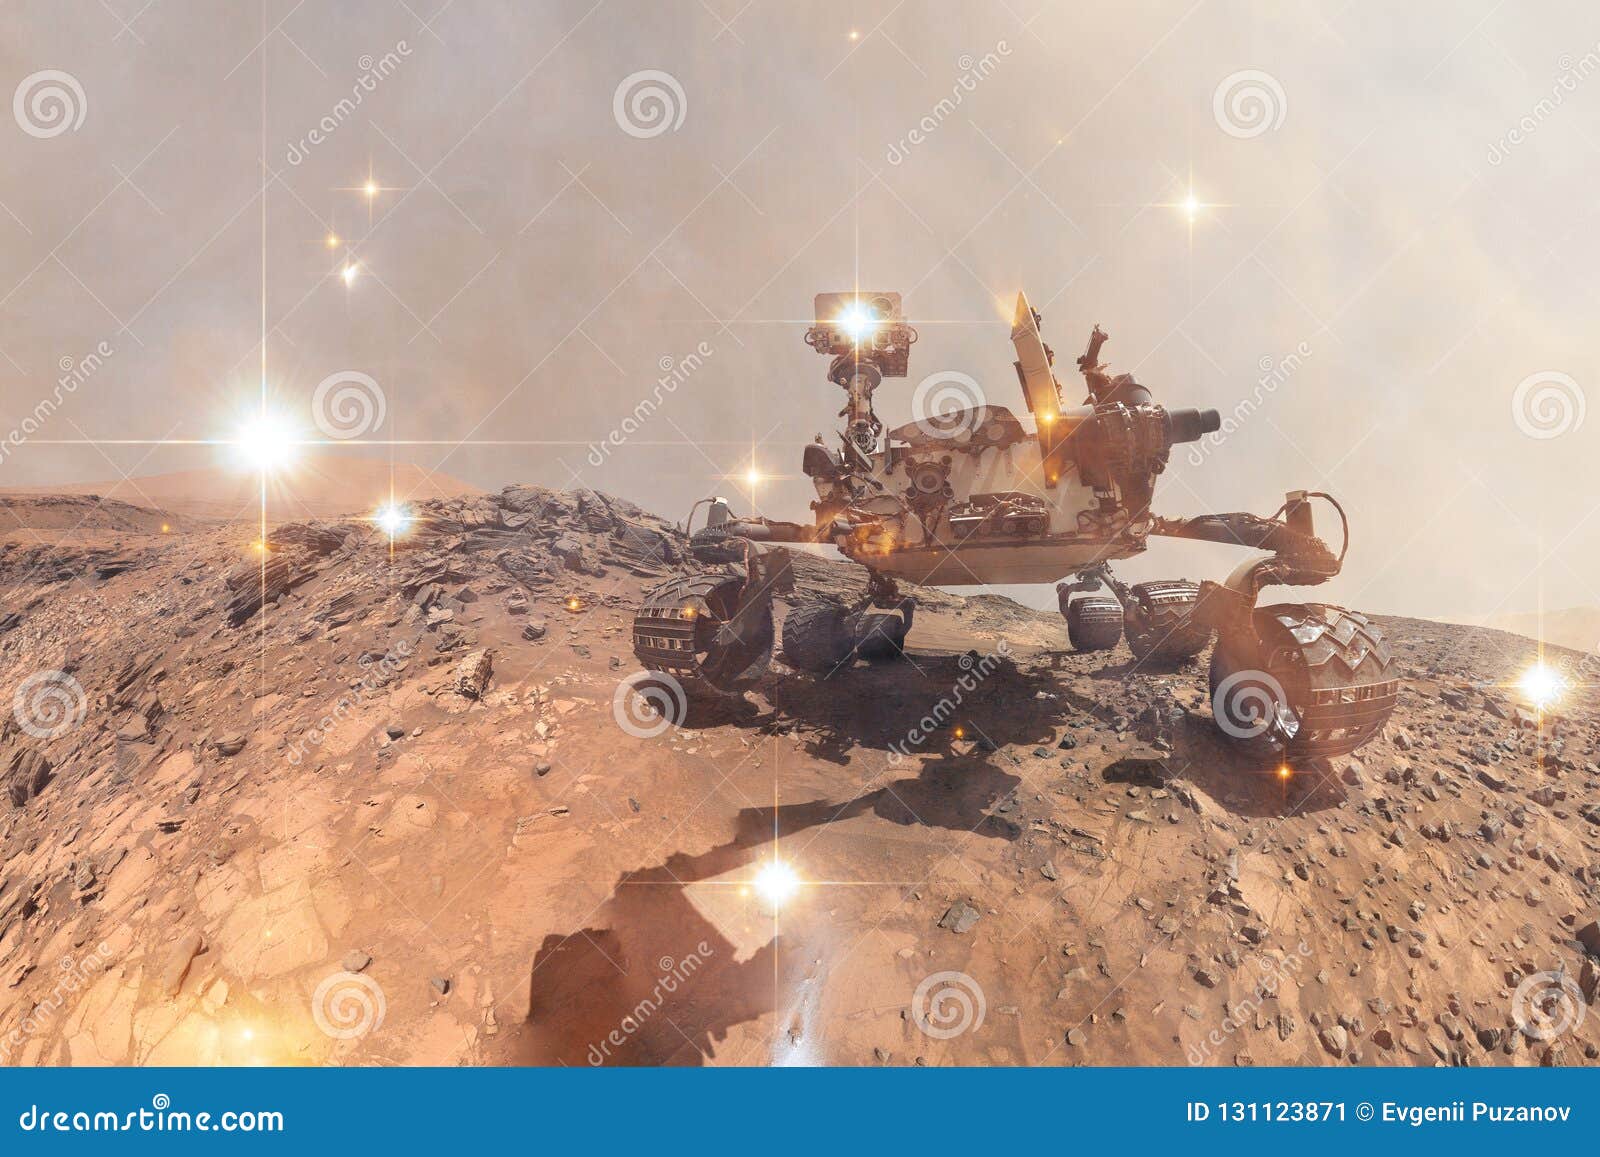 curiosity mars rover exploring the surface of red planet.